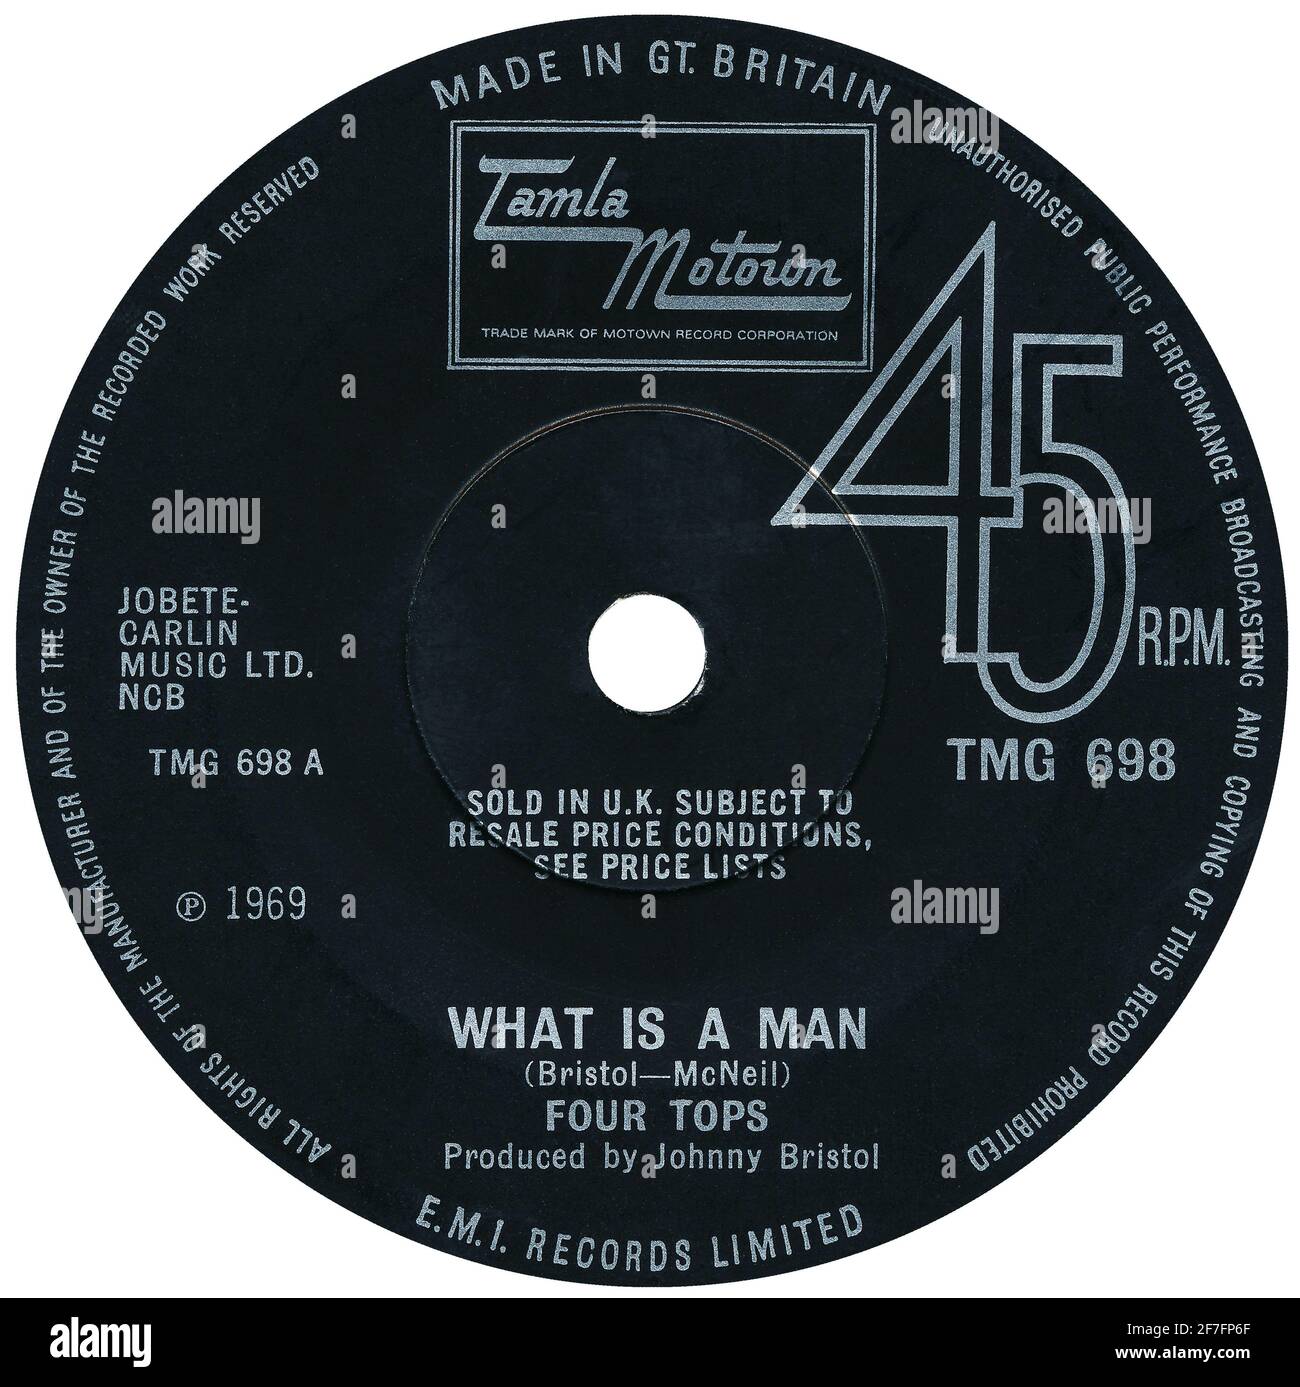 45 RPM 7' UK record label of What Is A Man by the Four Tops on the Tamla Motown label from 1969. Stock Photo